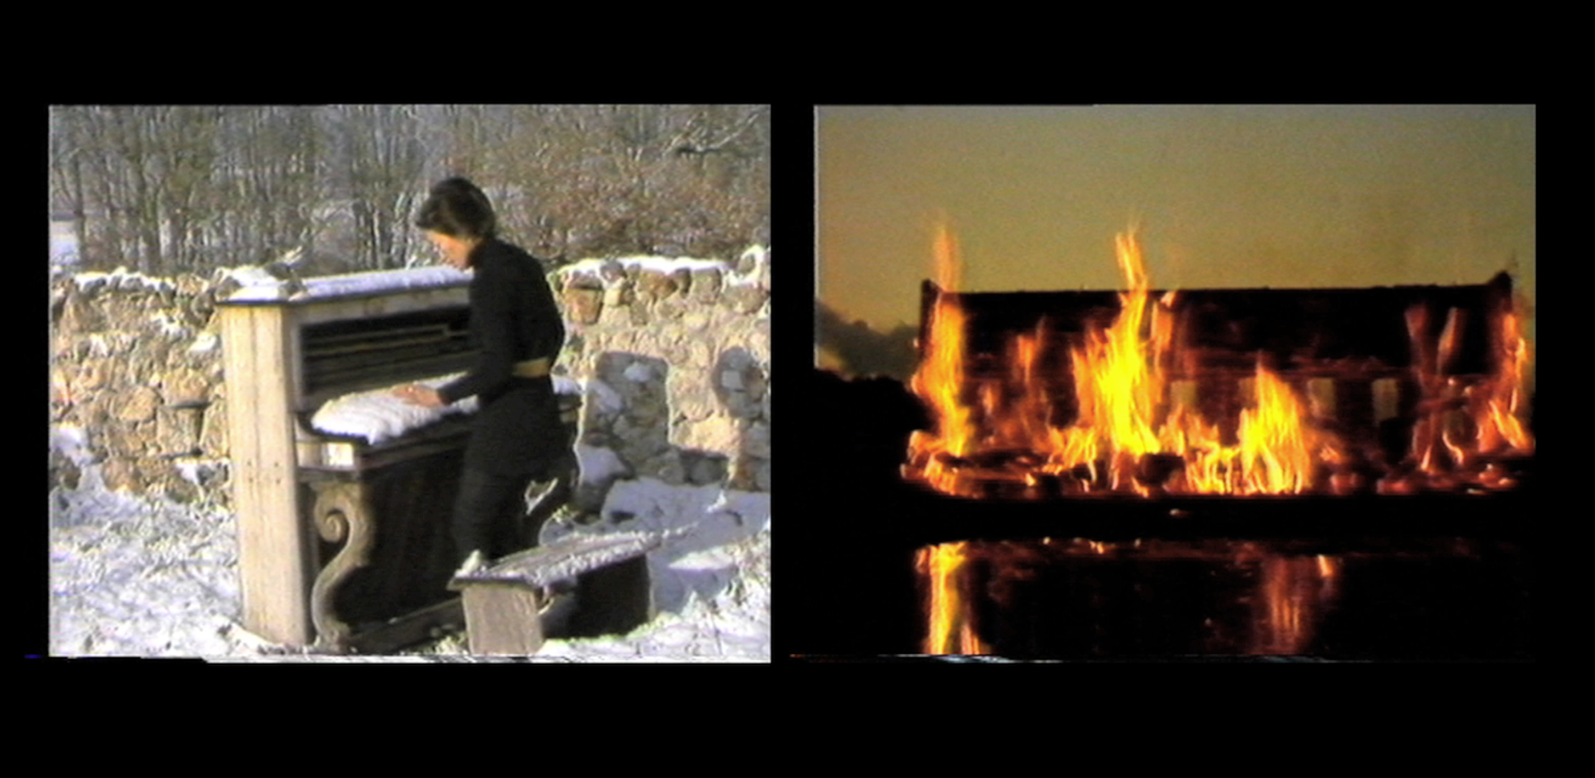 There are two pictures on a black background. The left picture shows a piano in a snowy landscape with a woman walking towards it. The right picture shows a burning piano at night.